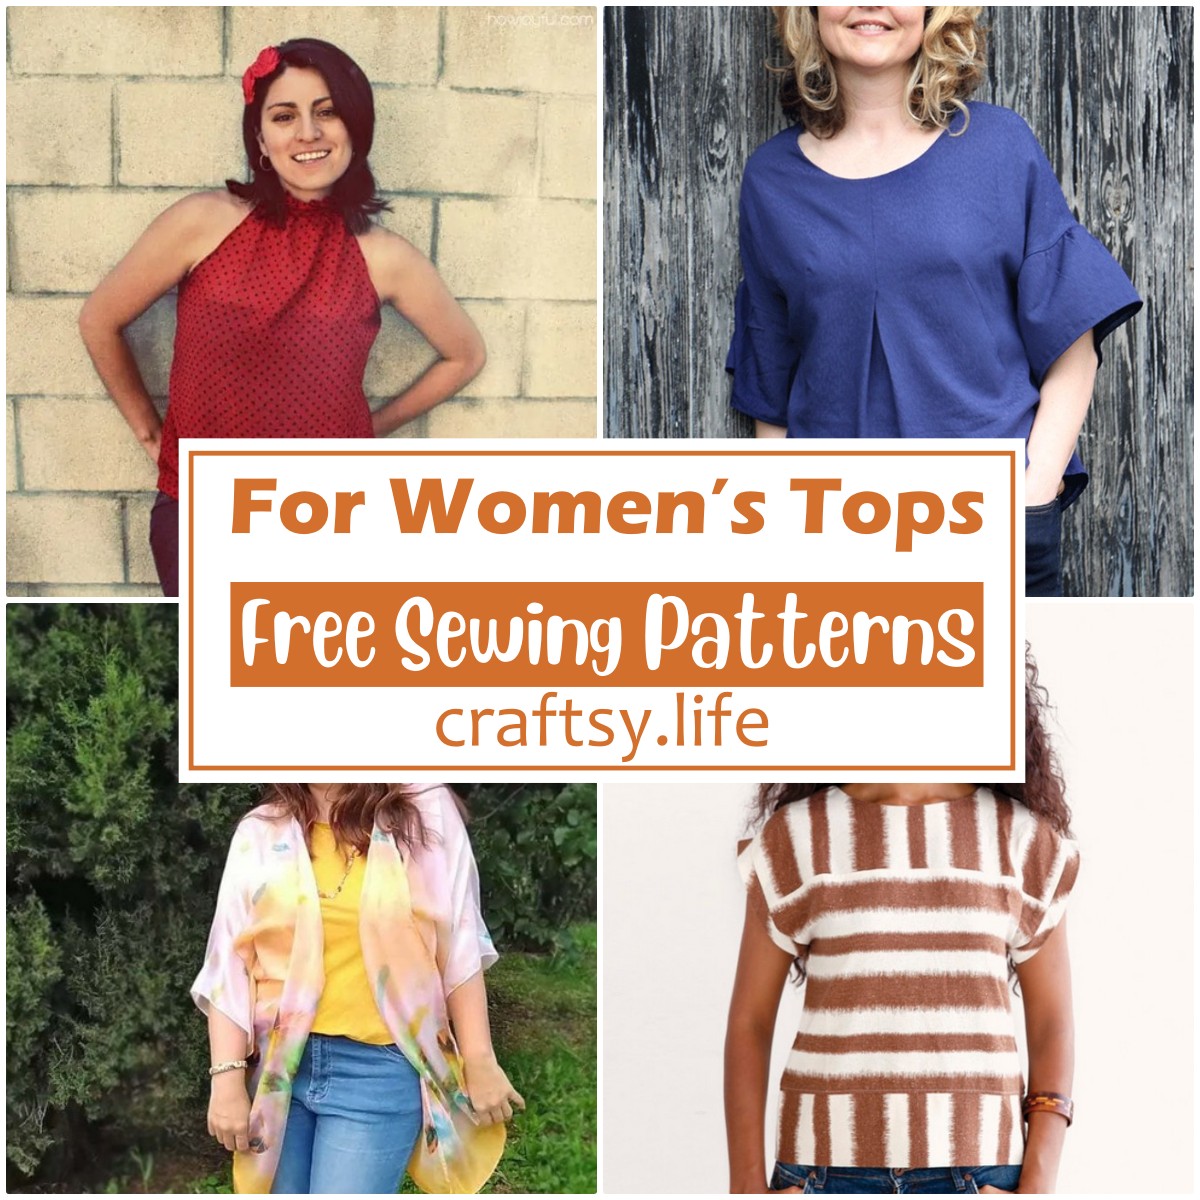 Free Sewing Patterns For Women’s Tops